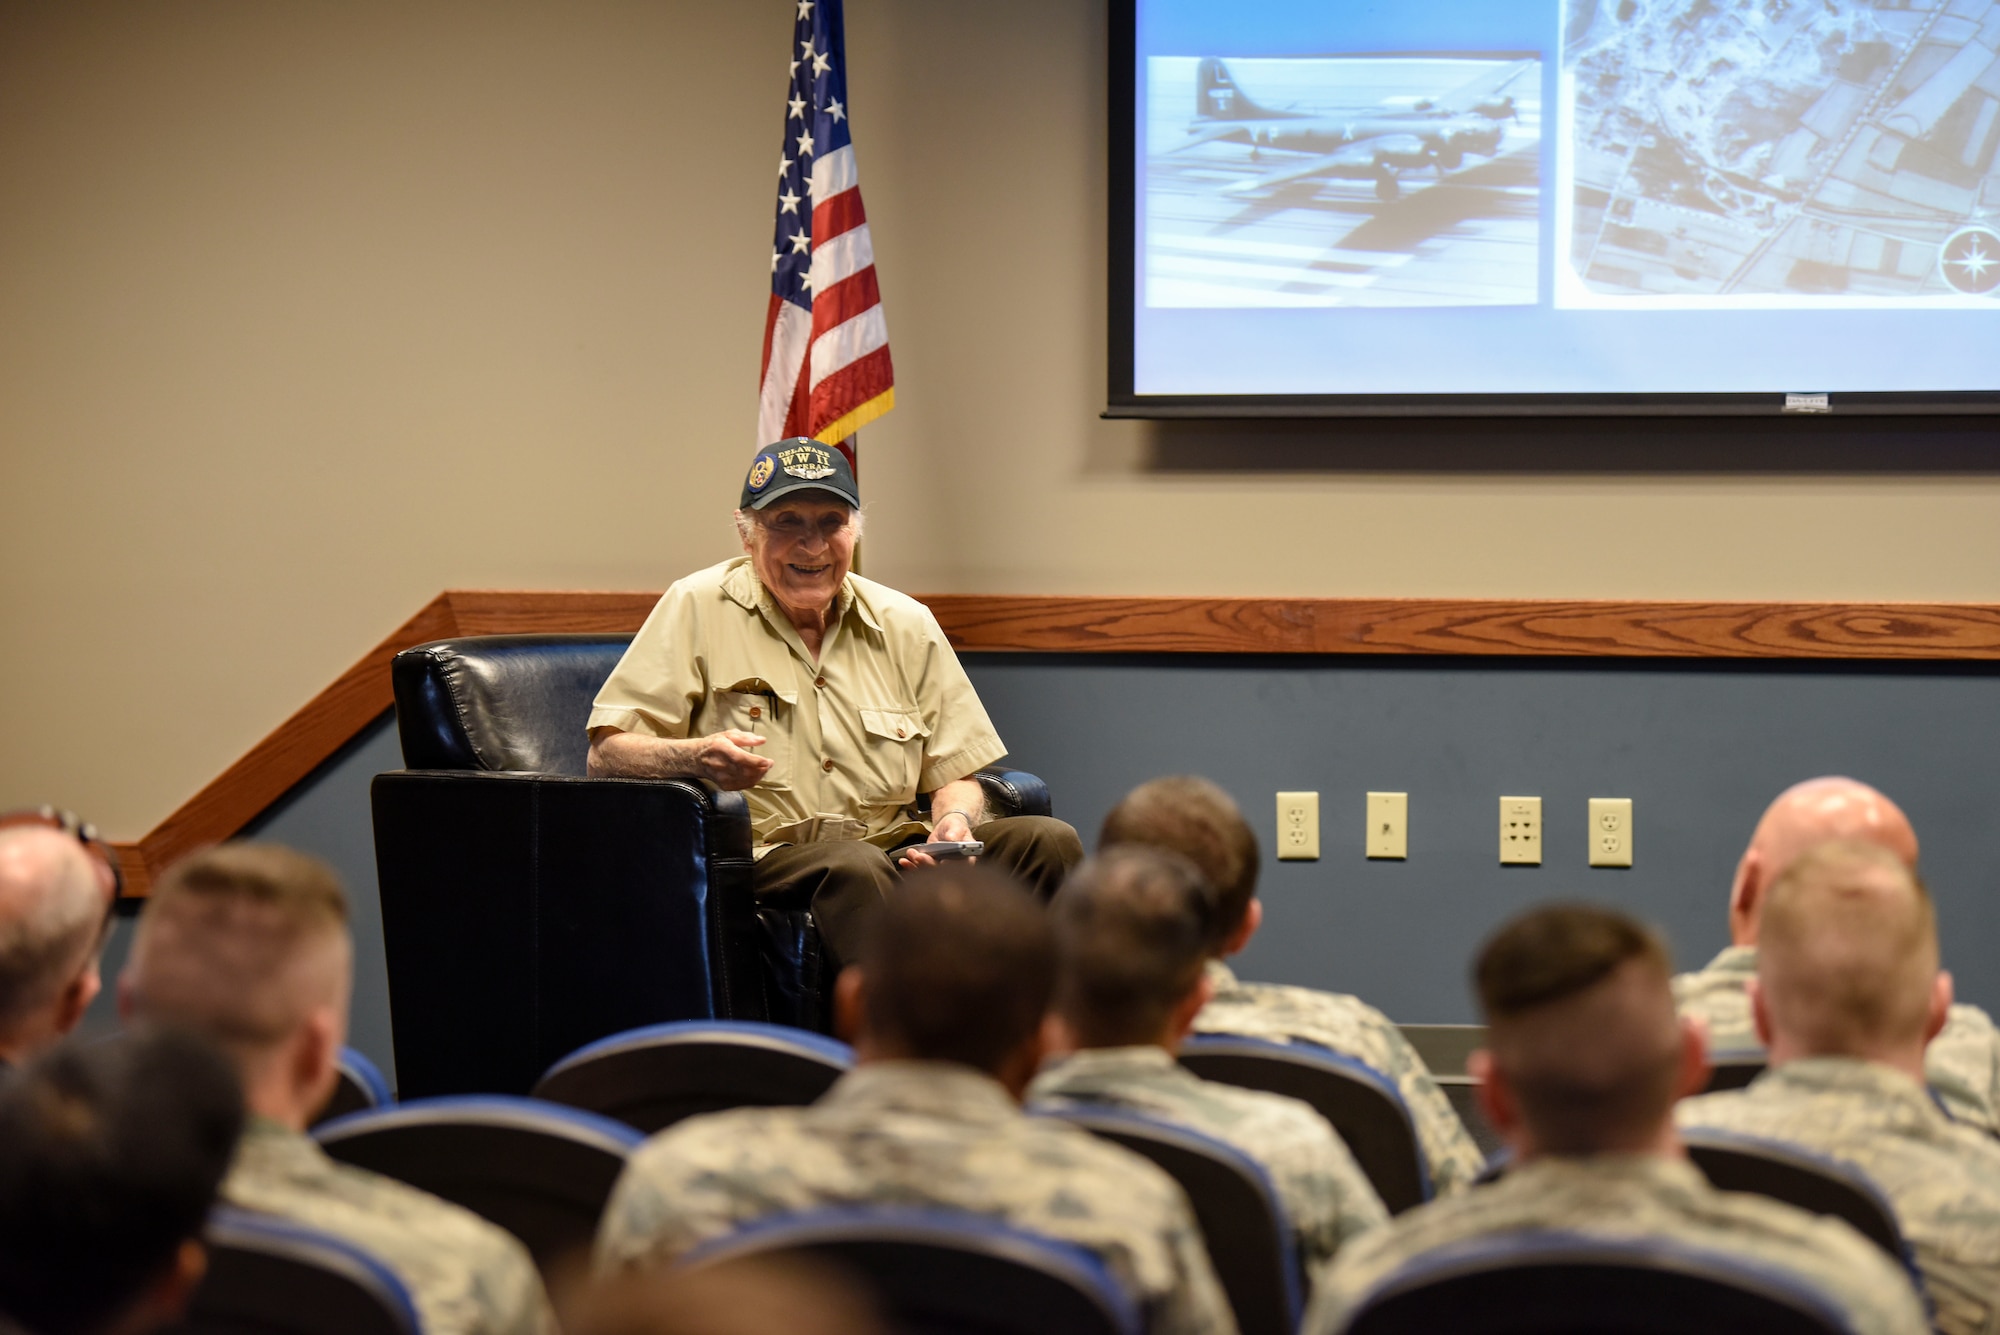 Retired Army Air Corps 1st Lt. Ray Firmani, World War II B-17 pilot, speaks at the quarterly Hangar Talk May 10, 2018, at Dover Air Force Base, Del. Firmani shared stories from his time as a pilot and the 25 combat missions he flew. (U.S. Air Force photo by Airman 1st Class Zoe M. Wockenfuss)